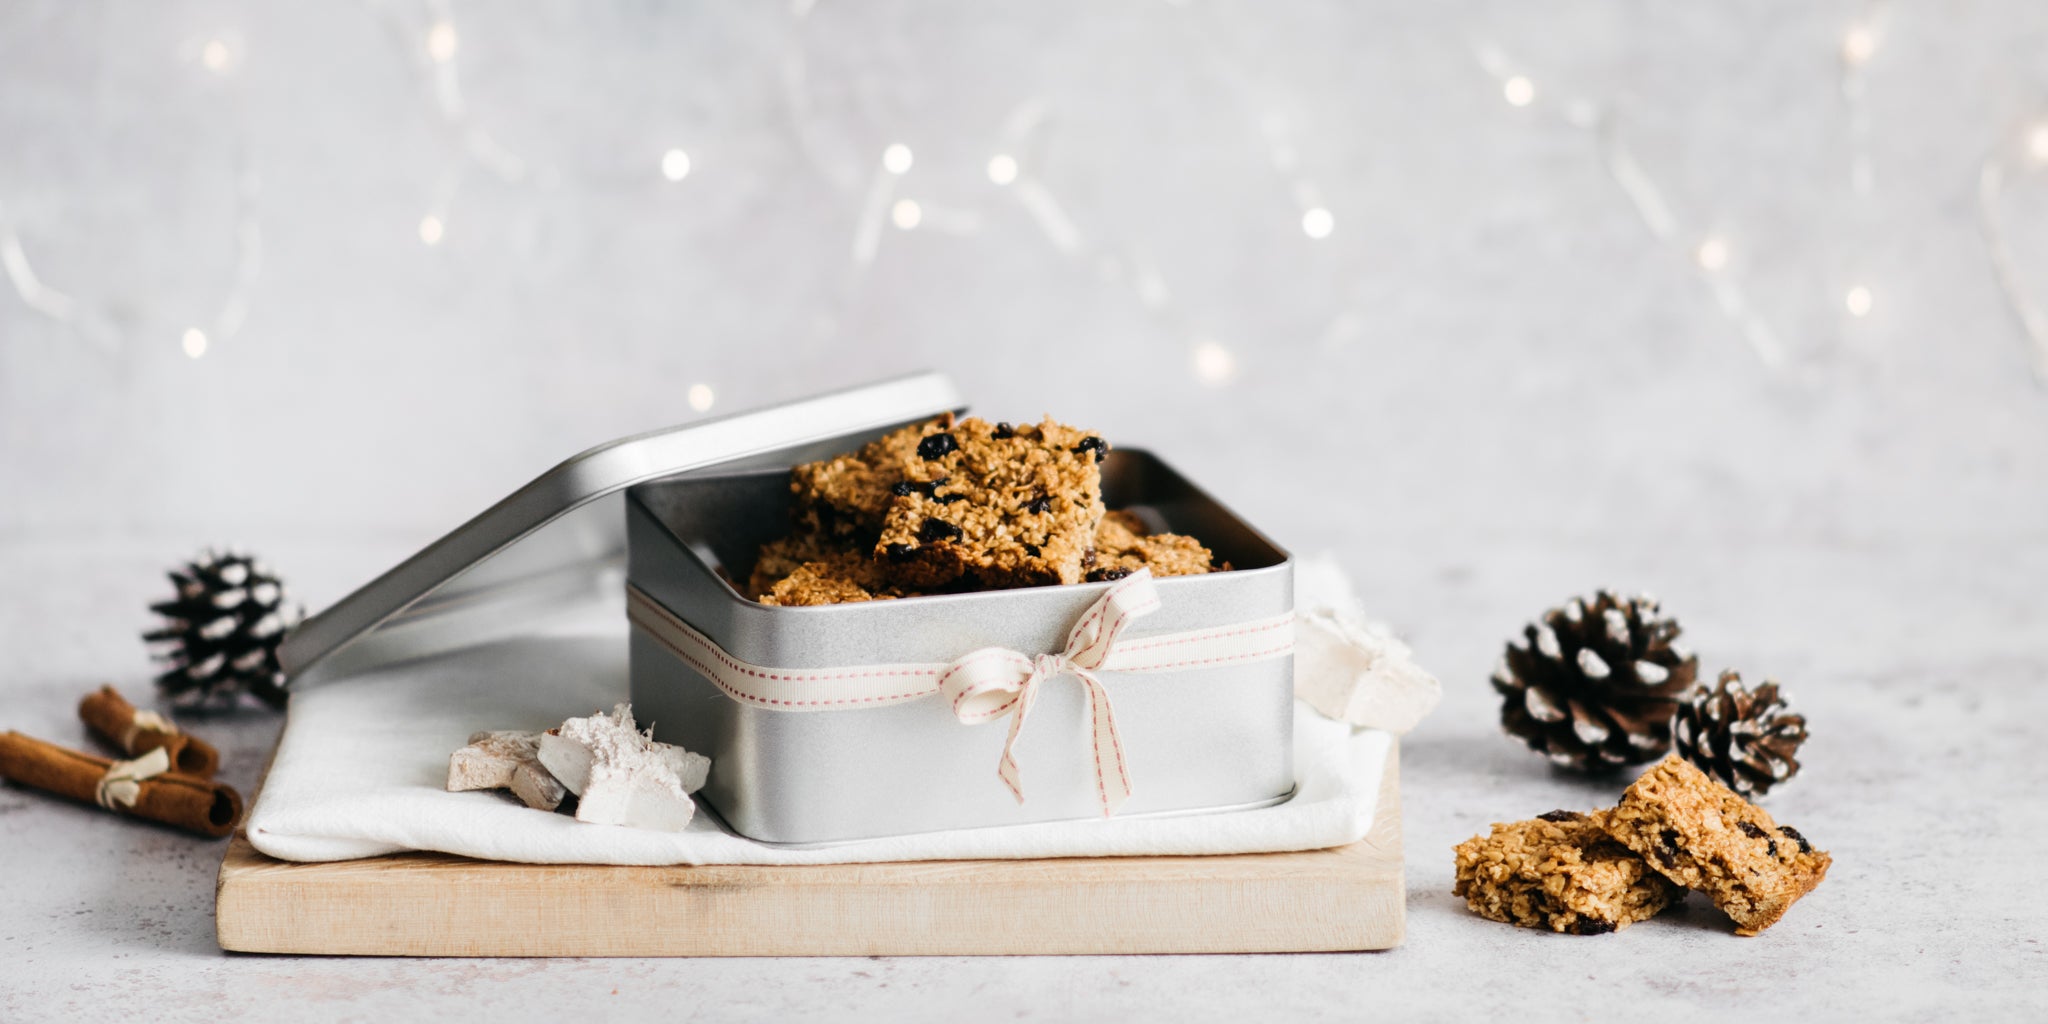 Flapjacks in a gifting tin with cinnamon sticks and pinecones beside it